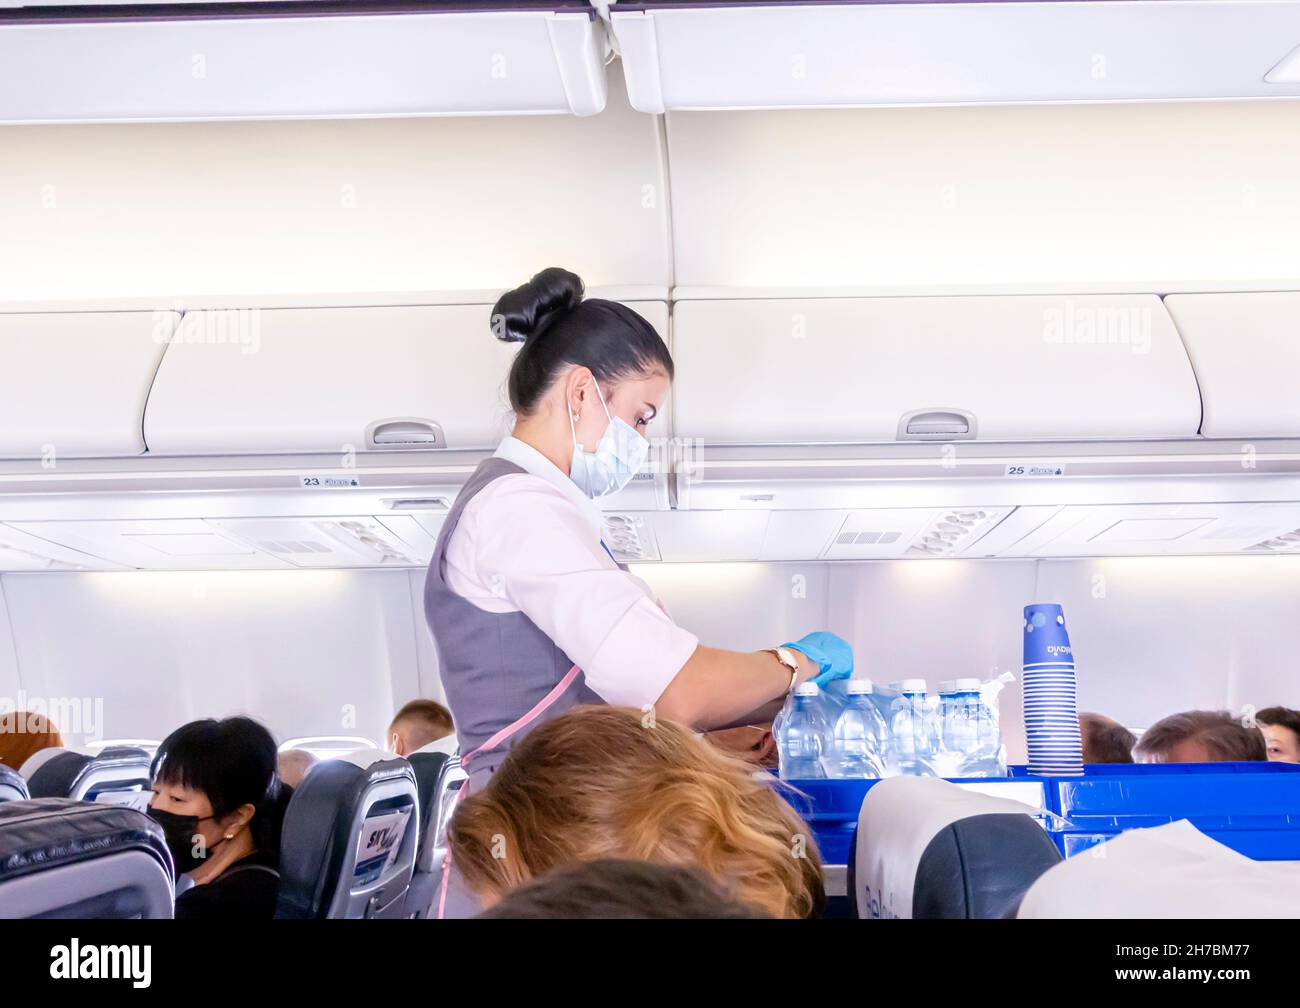 A Passenger Woman on a Airplane Flight Drinking a Bottle of Water Stock  Image - Image of hand, body: 184264045